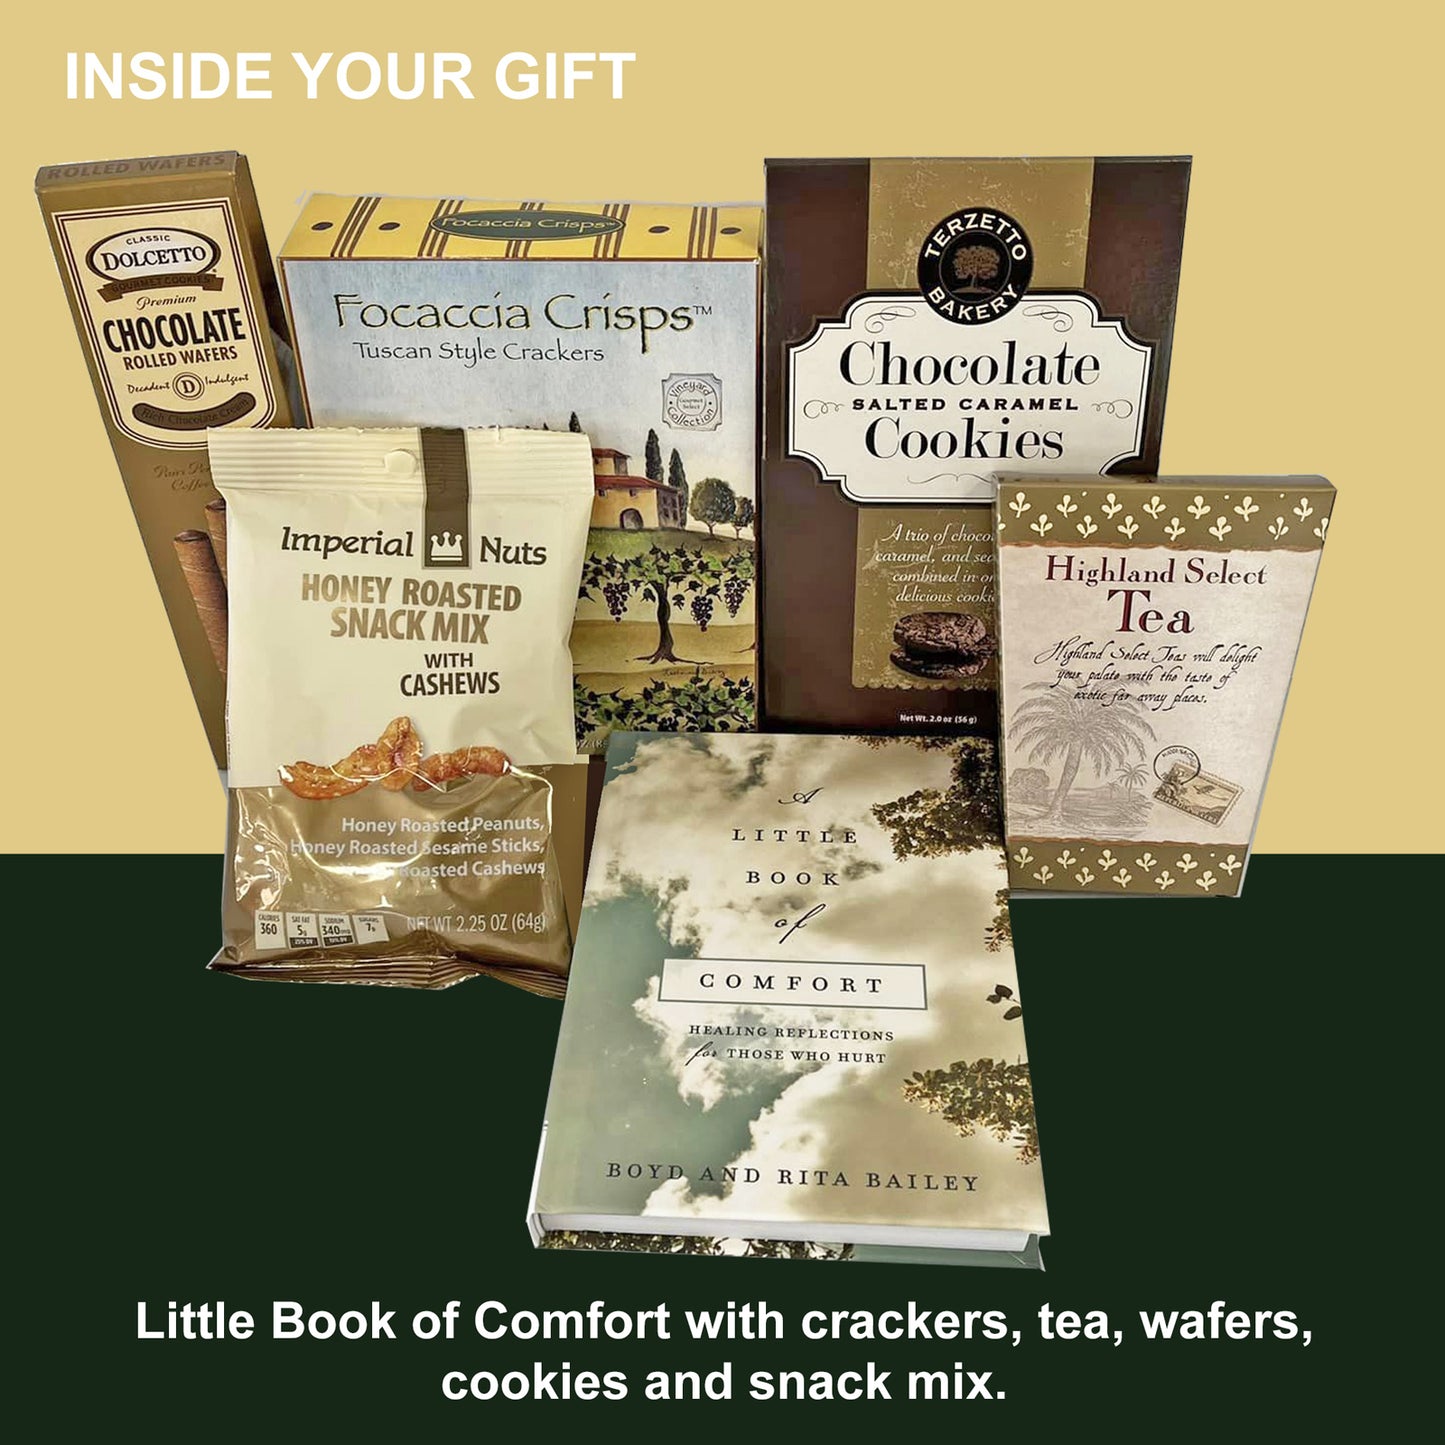 Little Book of Comfort Christian Gift Basket Shows You Are Thinking of Them During a Difficult Time